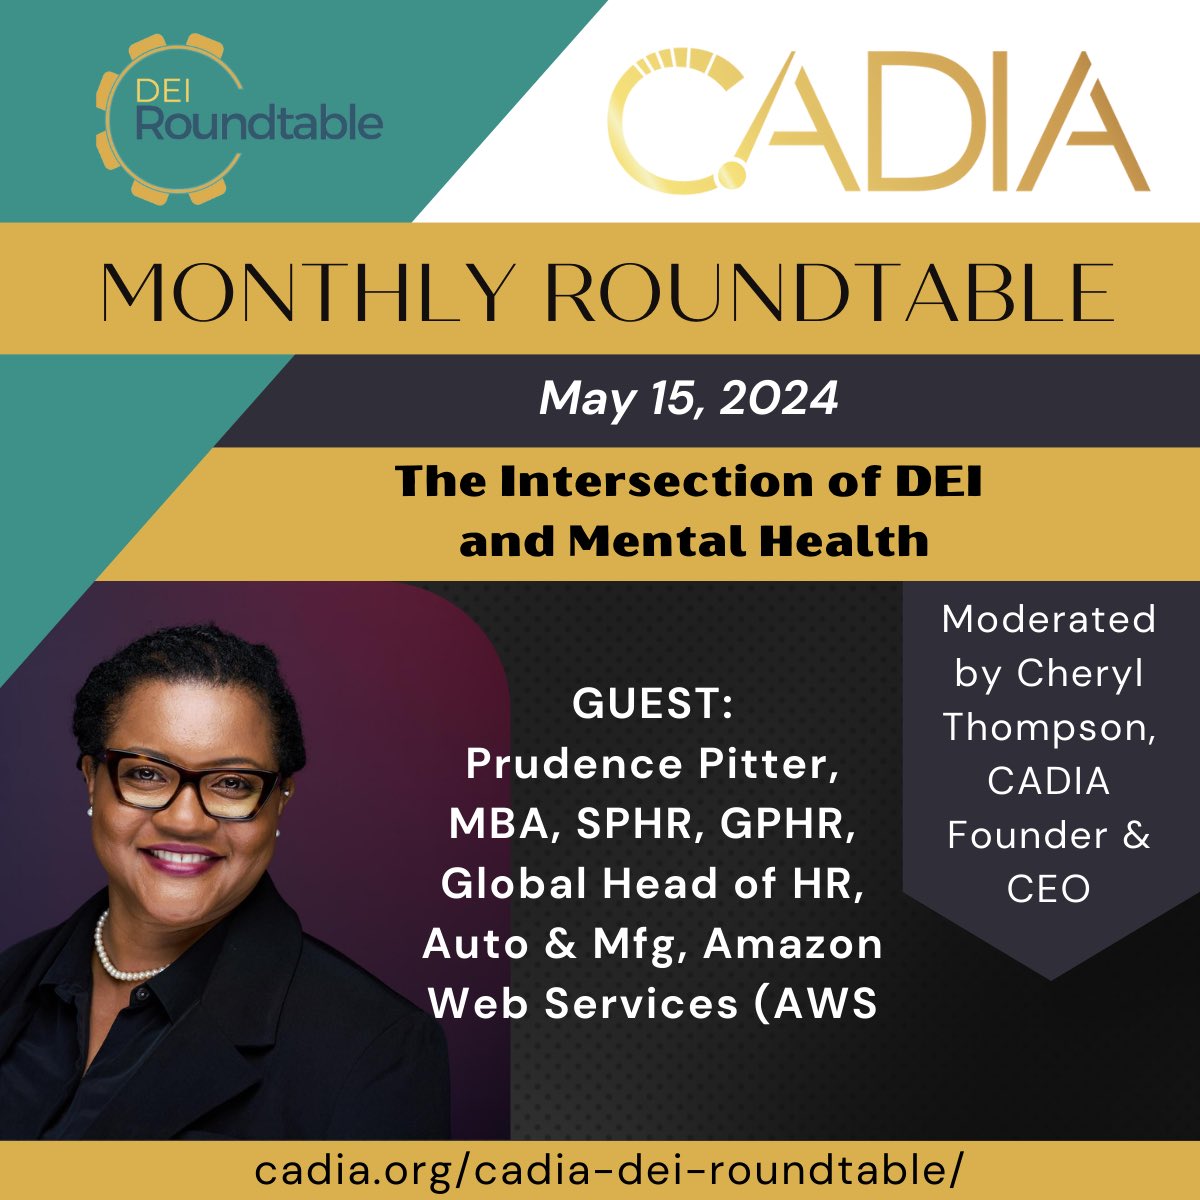 Next week the CADIA DEI Roundtable will meet to discuss 'The Intersection of DEI and Mental Health' Join us! #POVfromPrudence 

Request a guest invitation at lnkd.in/gZheY7bJ

#DEI #DiversityEquityInclusion #MentalHealth #MentalHealthAwareness #DrivenByDiversity #CADIA